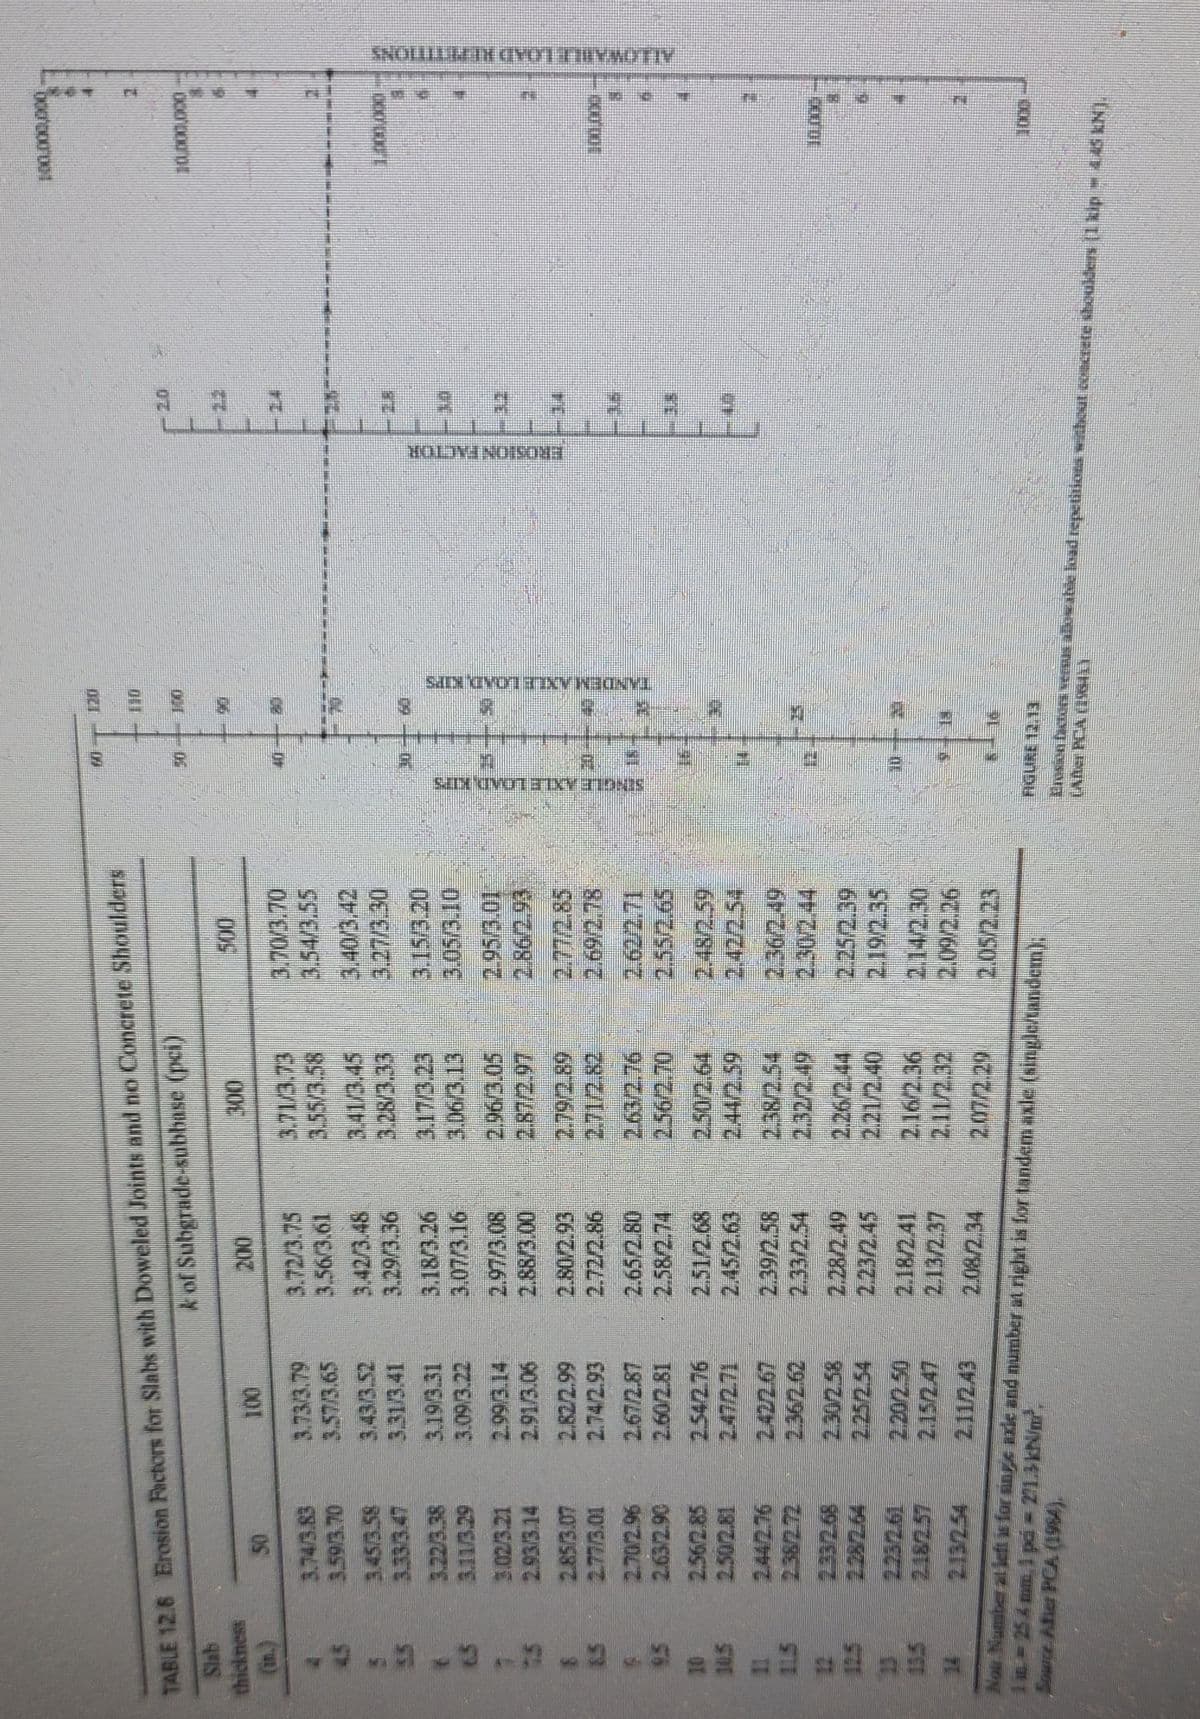 TABLE 12.8 Erosion Factors for Slabs with Doweled Joints and no Concrete Shoulders
k of Subgrade-subbase (pci)
Slab
thickness
(in.)
5
55
9
6.5
7
1.2
5
10
10.5
11
13.5
50
3.74/3.83
3.59/3.70
3.45/3.58
3.333.47
3.22/3.38
3.11/3.29
3.02/3.21
2.93/3.14
2.85/3.07
2.77/3.01
2.70/2.96
2.63/2.90
2.56/2.85
2.50/2.81
2.442.76
2.182.57
2.132.54
100
3.73/3.79
3.57/3.65
3.43/3.52
3.31/3.41
3.19/3.31
3.09/3.22
2.99/3.14
2.91/3.06
2.82/2.99
2.74/2.93
2.67/2.87
2.60/2.81
2.422.67
2.36/2.62
2.30/2.58
2.20/2.50
2.15/2.47
2.11/243
200
3.72/3.75
3.56/3.61
3.42/3.48
3.29/3.36
3.18/3.26
3.07/3.16
2.97/3.08
2.88/3.00
2.80/2.93
2.72/2.86
2.65/2.80
2.58/2.74
2.51/2.68
2.45/2.63
2.39/2.58
2.33/2.54
2.28/2.49
2.23/2.45
2.18/2.41
2.13/2.37
2.08/2.34
300
3.71/3.73
3.55/3.58
3.41/3.45
3.28/3.33
3.17/3.23
3.06/3.13
2.96/3.05
2.87/2.97
2.79/2.89
2.71/2.82
263/2,76
2.56/2.70
2.50/2.64
2.44/2.59
2.38/2.54
2.32/2.49
2.26/2.44
2.21/2.40
2.16/2.36
2.11/2.32
207/2.29
3.70/3.70
3.54/3.55
3.40/3.42
3.27/3.30
3.15/3.20
3.0573.10
2.95/3.01
2.86/2.93
2.77/2.85
2.69/2.78
2.62/2.71
2.36/2.49
2.25/2.39
2.19/2.35
2.14/2.30
2.09/2.26
2.05/2.23
in. ≈ 25 2 mm. 1 pá – 271.3 kN/m²³,
Now Number at left is for sine axie and number at right is for tandem axle (single/tandem).
Source After PCA (1984).
#
N
NINY UVOTTINTIONIS
P
2
10
2
2
SIIN GYOTTINN KJŪNVI
HODVINO SOMA
LLLLLL
14
__IT=
1.8
u
ILLI
2
S
4
IN
9
100.000,000
110,000,000
1.000.000
195
****
⠀⠀
H
THE
10000
1000
FIGURE 12.13
LADer PCA (1SILY
Erosion factors versus allowable load repetitions without concrete shoulders (1 kip – 4.45 KN).
AHWABU. LOAD RIPETITIONS